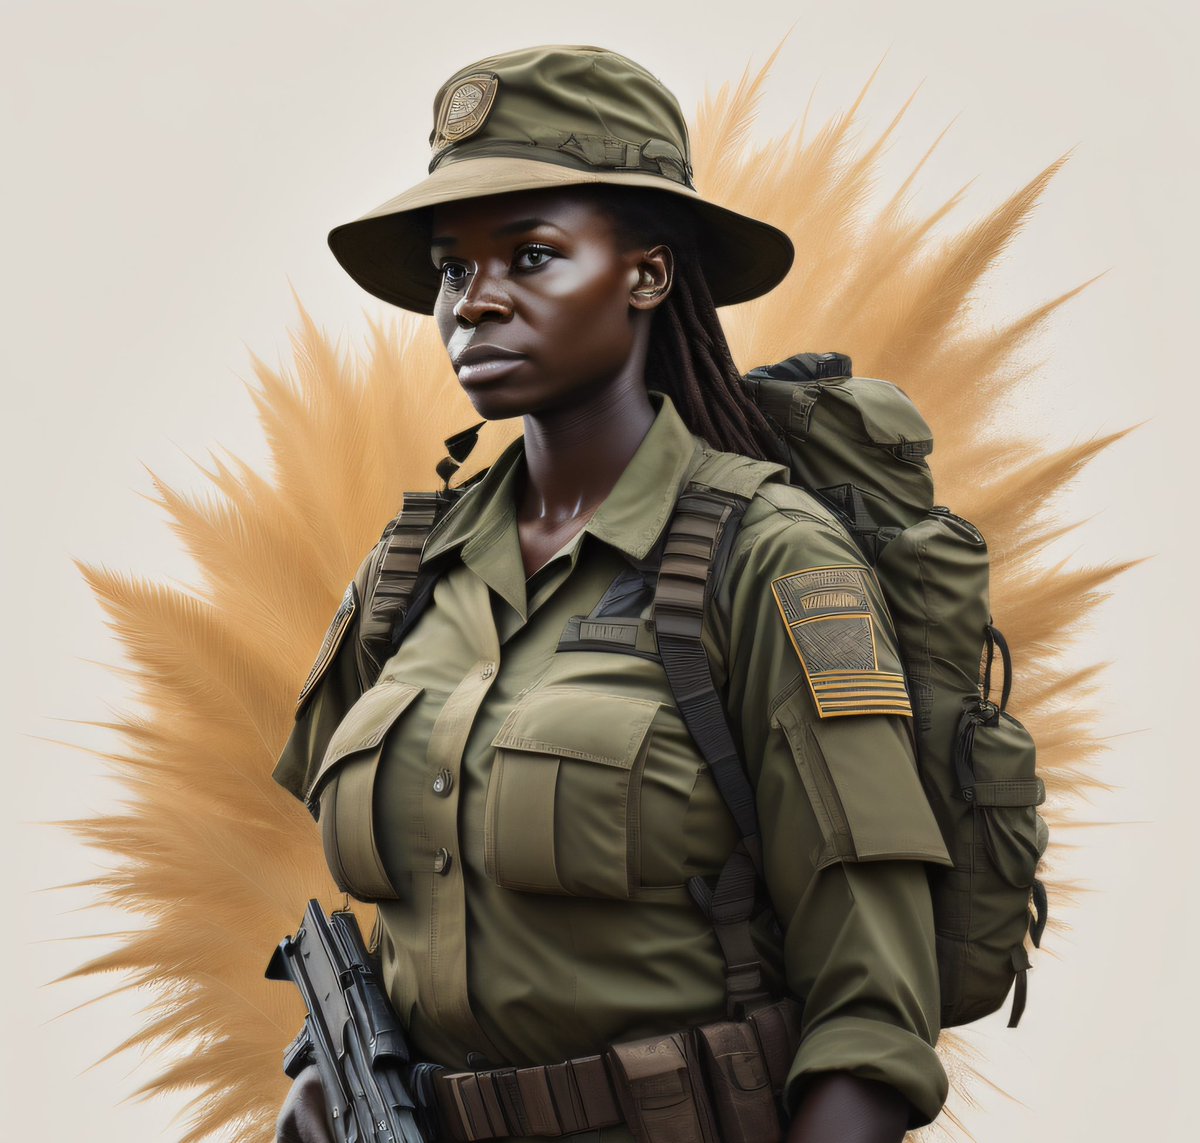 Coming Soon! The #NFT character of our female #AntiPoaching ranger is a symbol of hope and demonstrates that women have the ability to make positive changes in the world. #WomenInConservation #WomenEmpowerment Join us on this inspiring journey! Join us via @discord